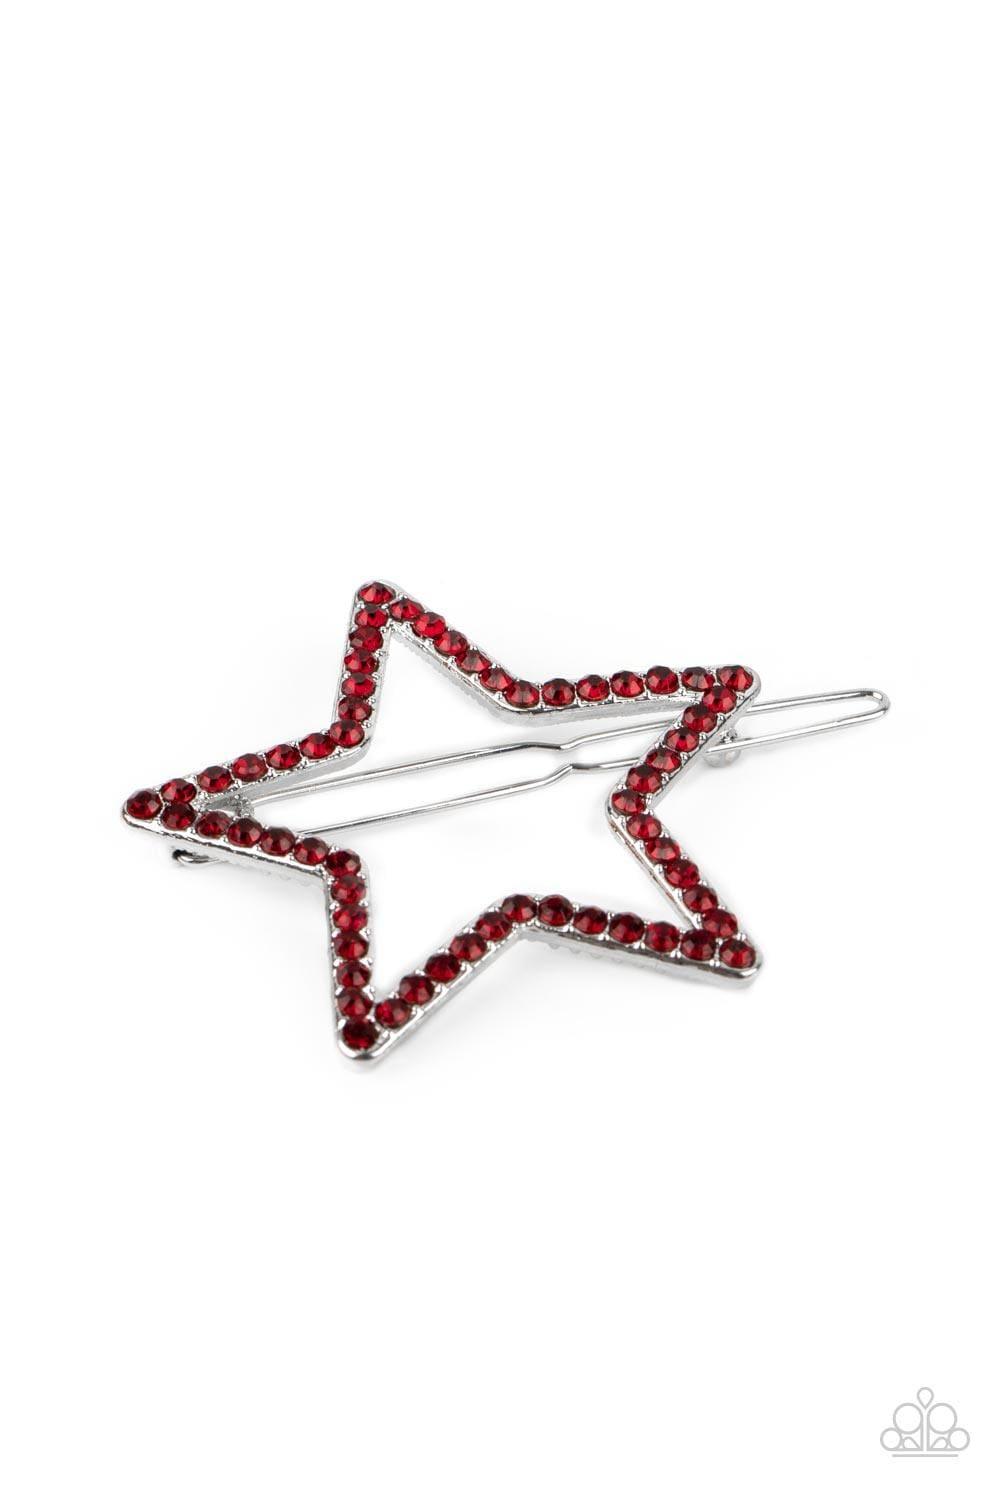 Paparazzi Accessories - Stellar Standout - Red Hair Clip - Bling by JessieK